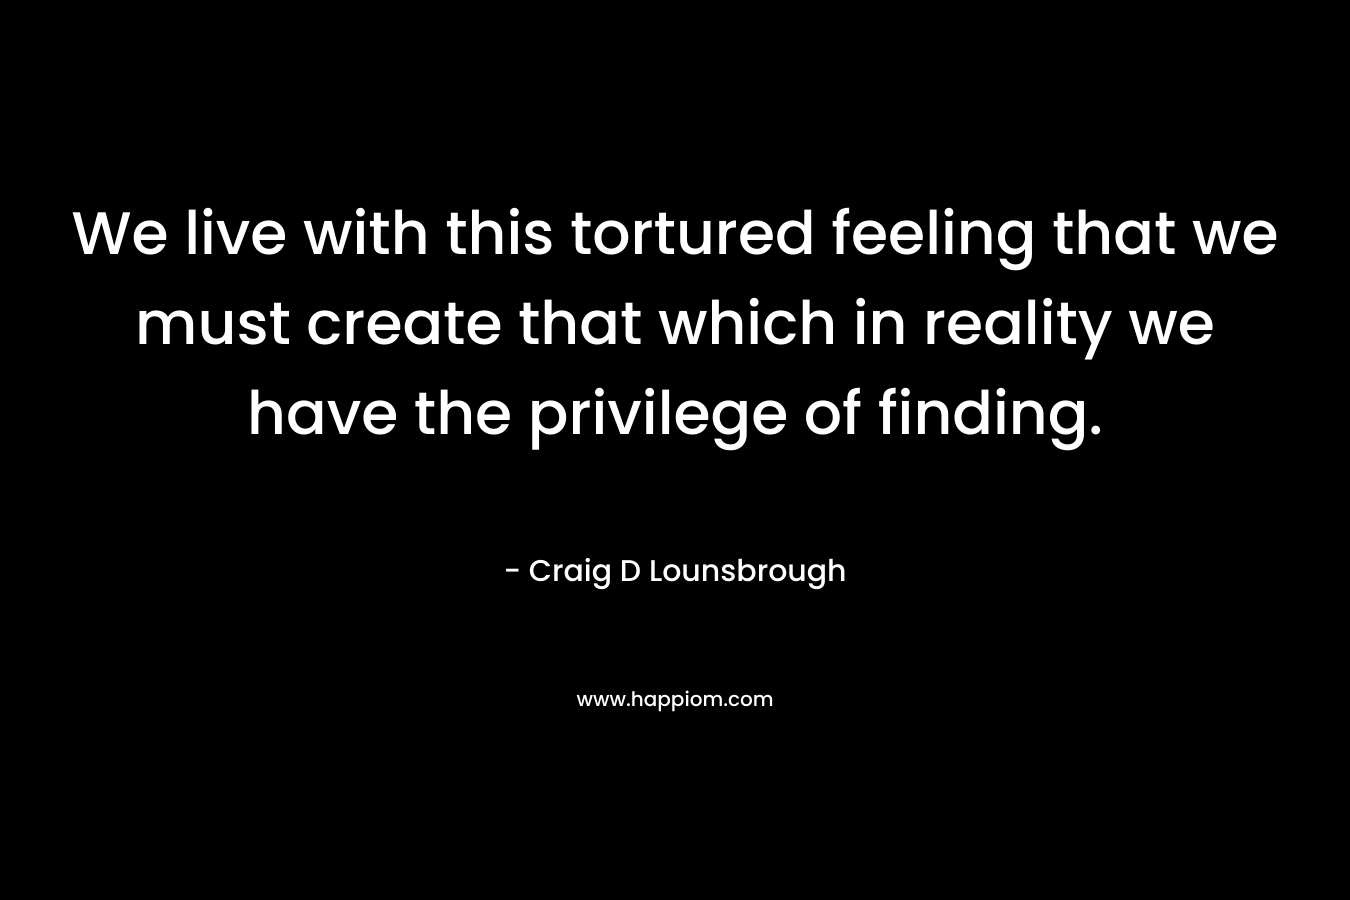 We live with this tortured feeling that we must create that which in reality we have the privilege of finding.